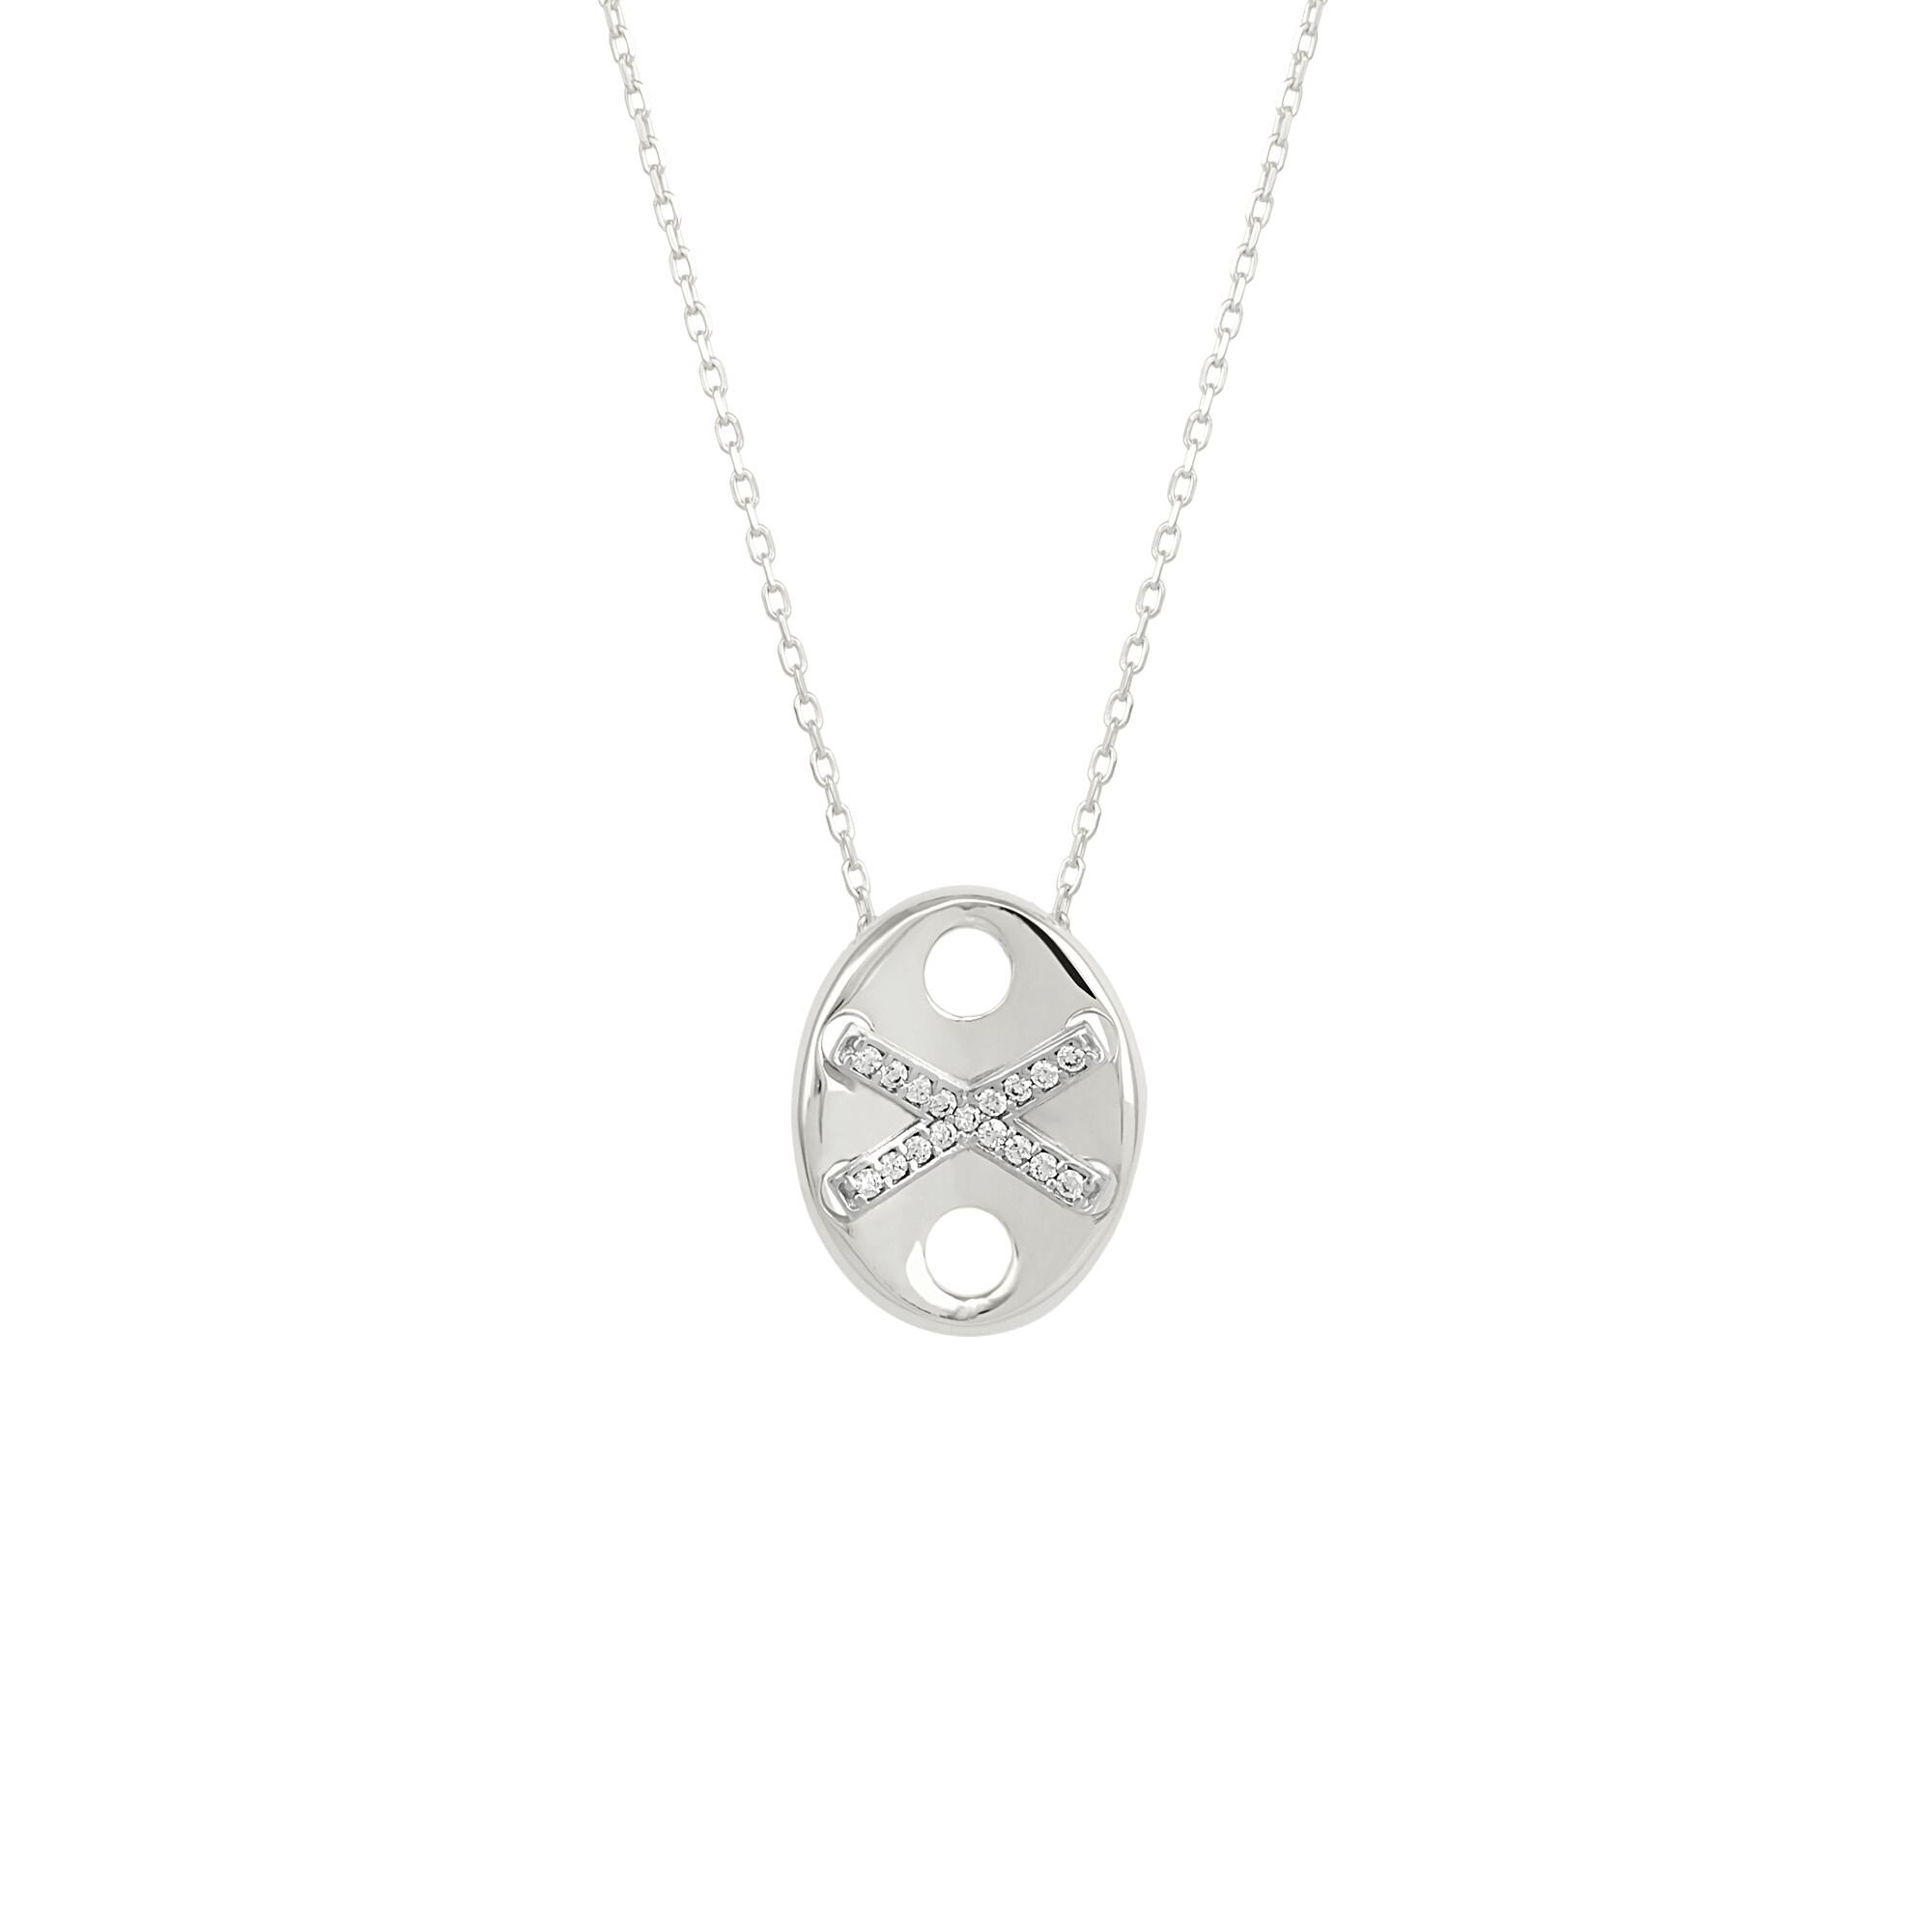 X Necklace Elyptical Sterling Silver